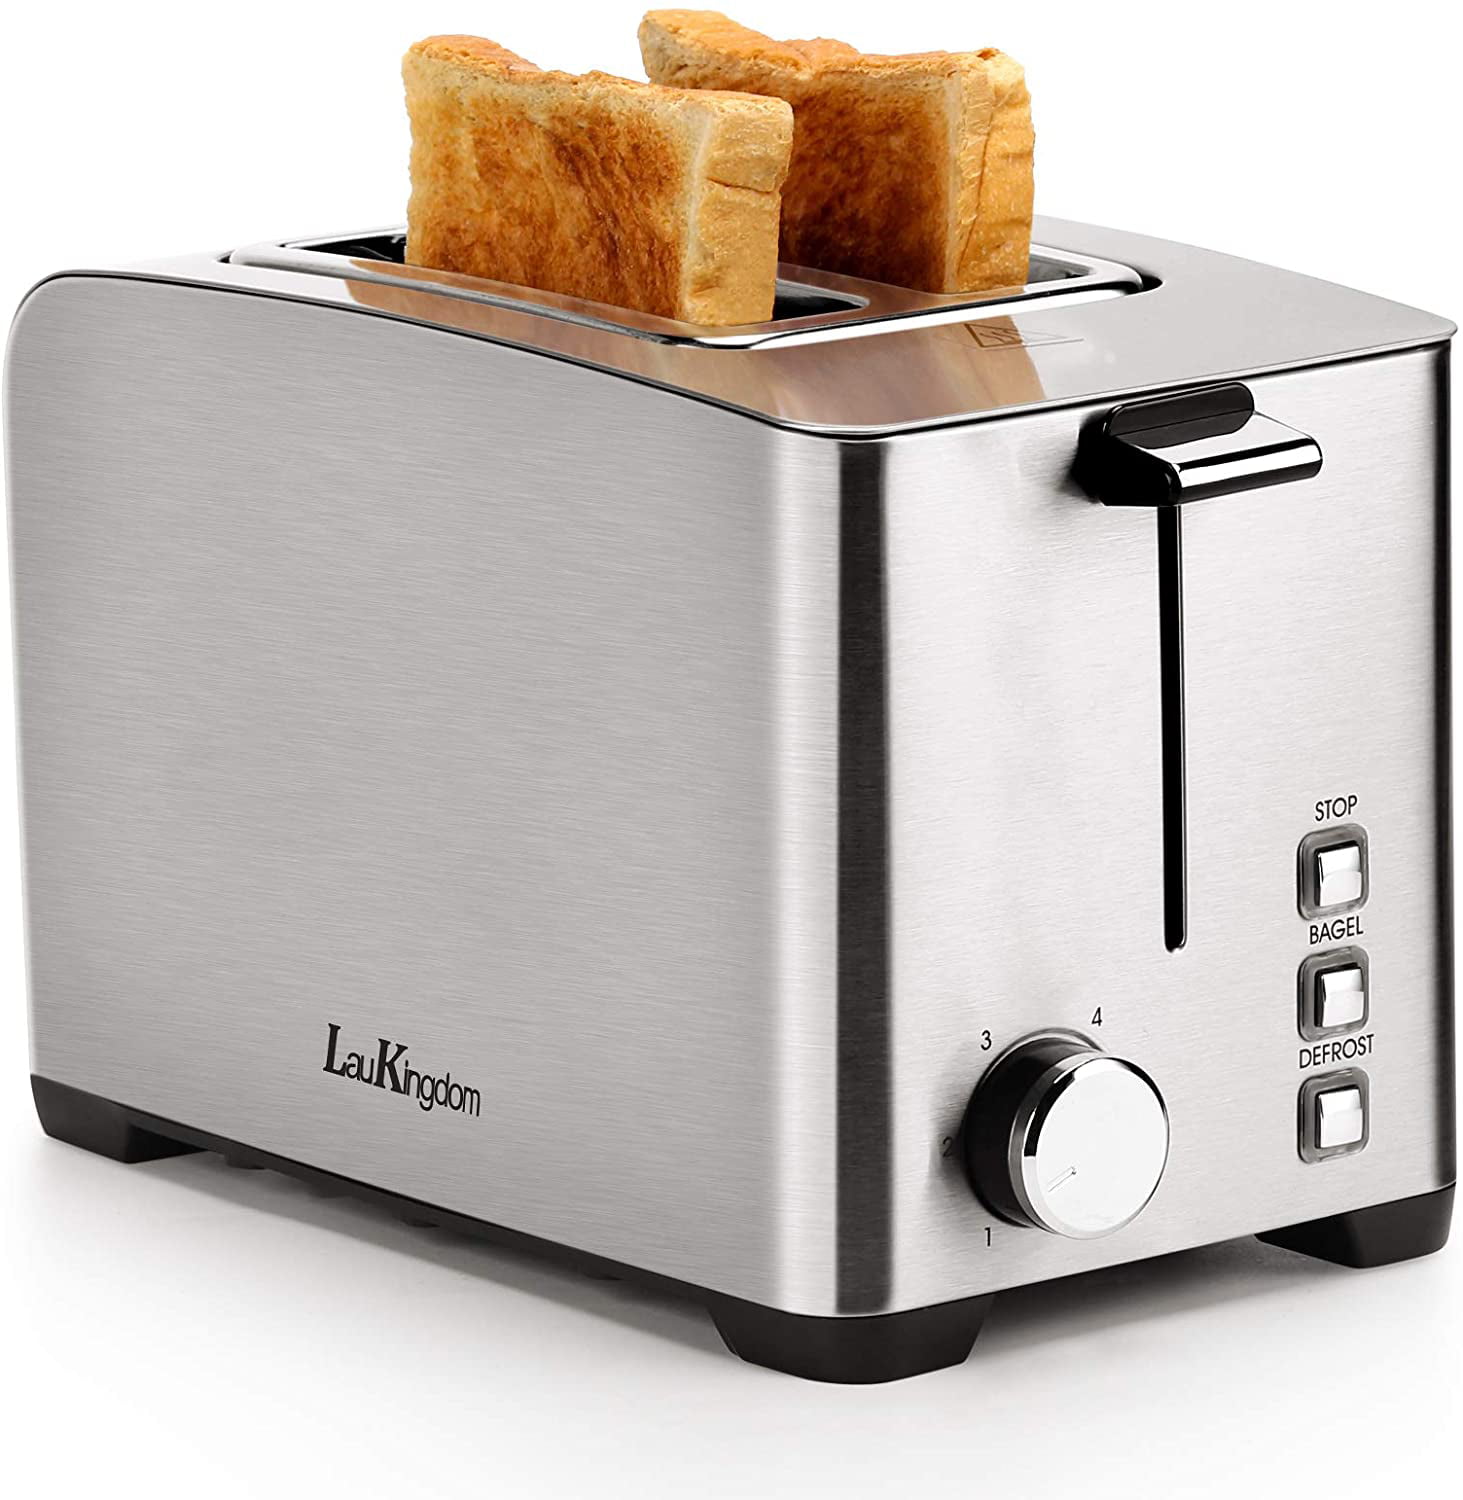 Cheap Toaster Basic Small Two 2 Slice Strudel Stainless Steel The Best Selling 